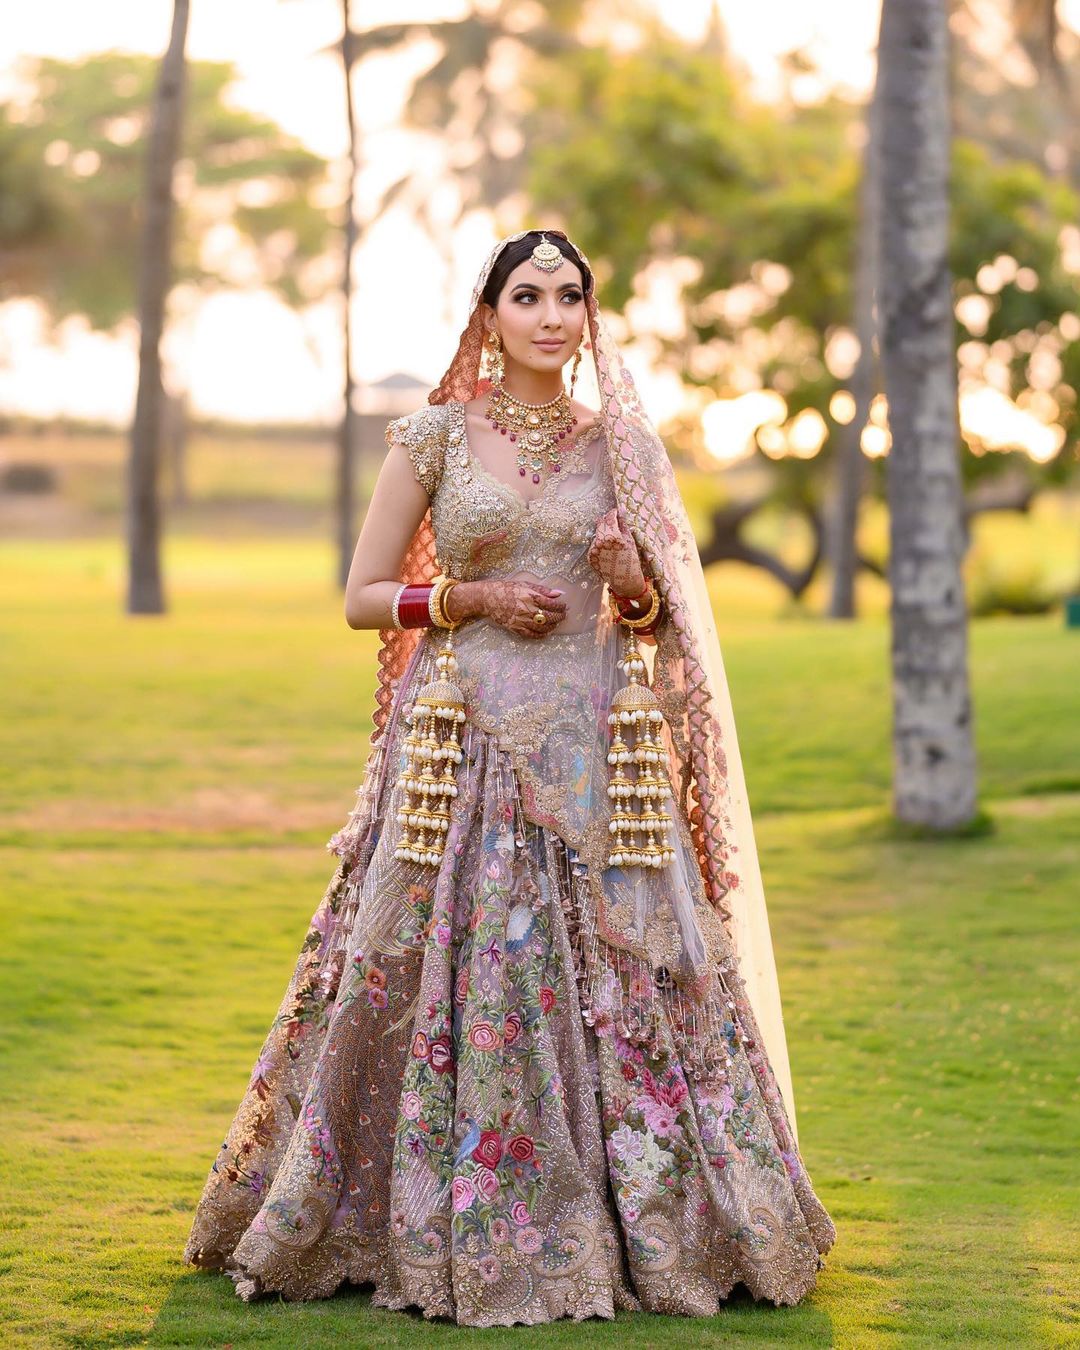 How To Choose A Bridal Outfit Based On Your Skin Tone - Pyaari Weddings